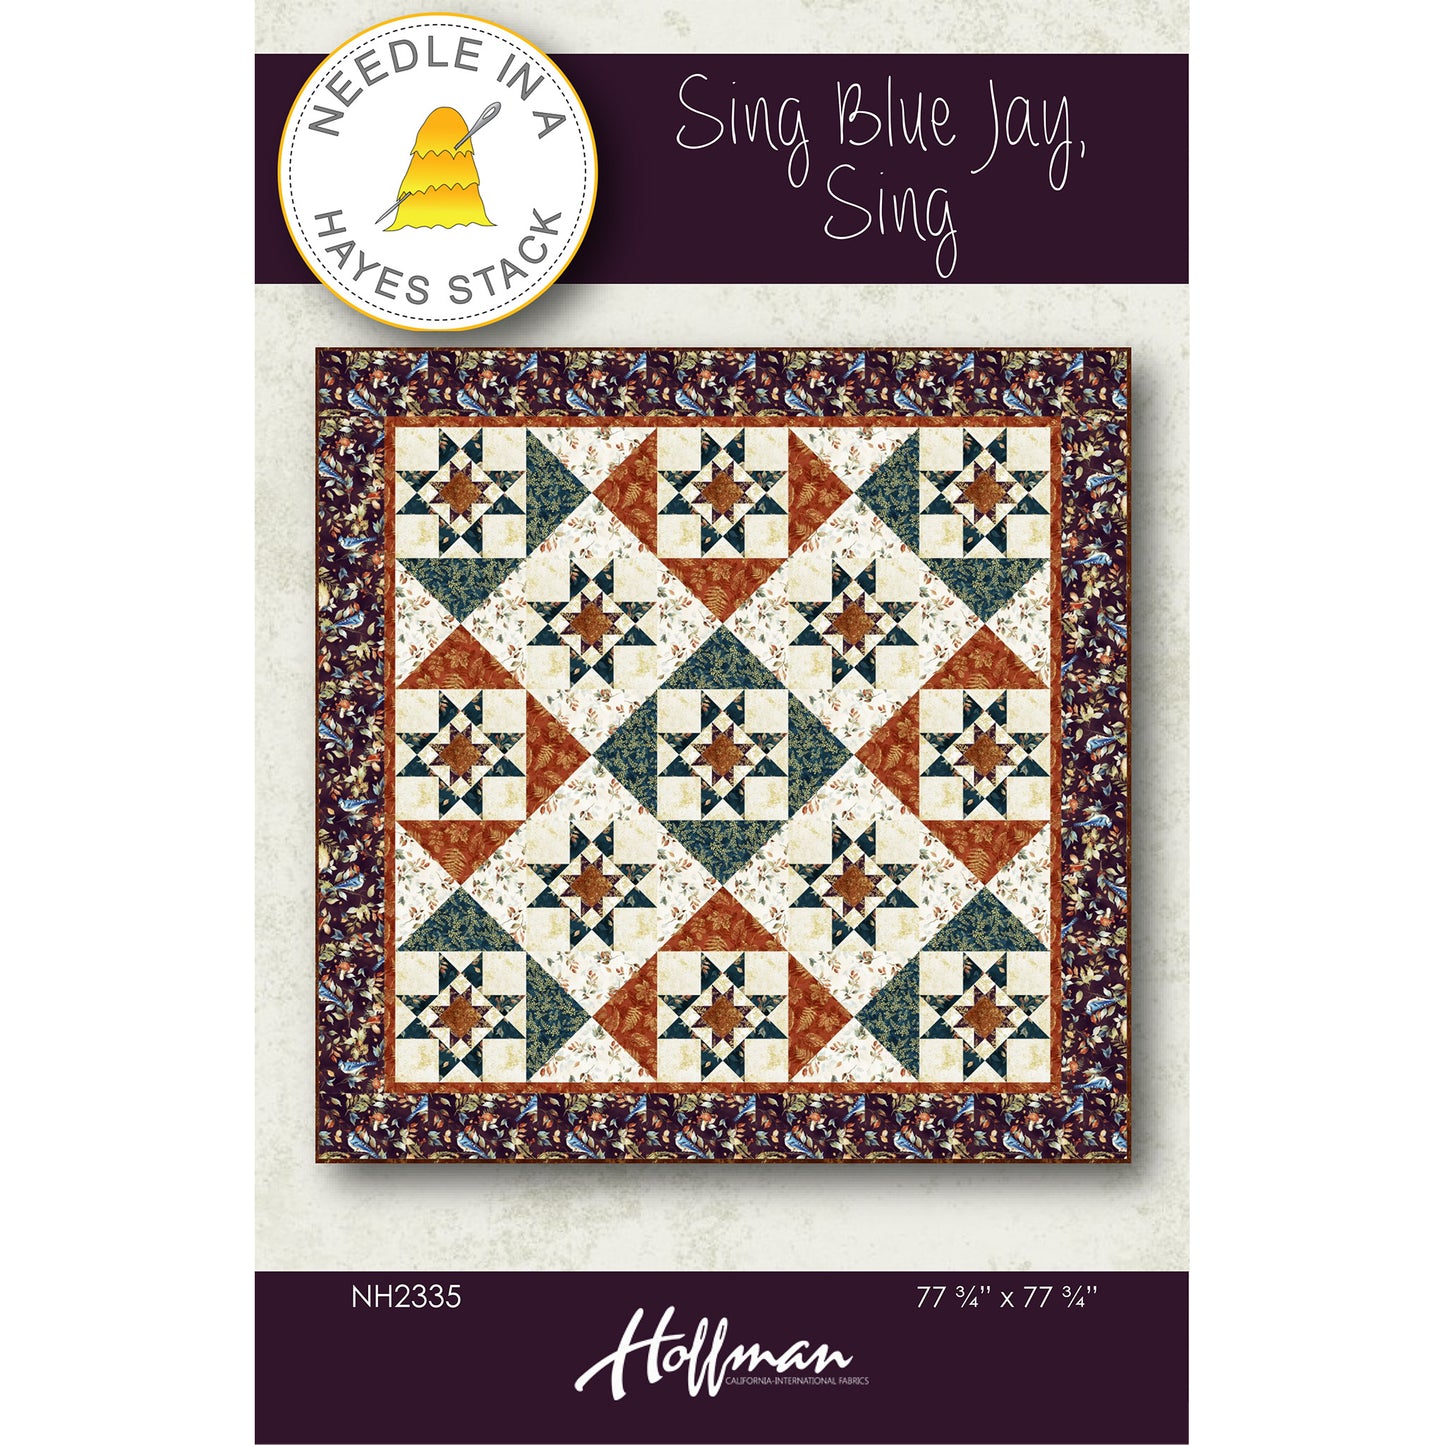 Sing Blue Jay, Sing Quilt NH-2335e - Downloadable Pattern